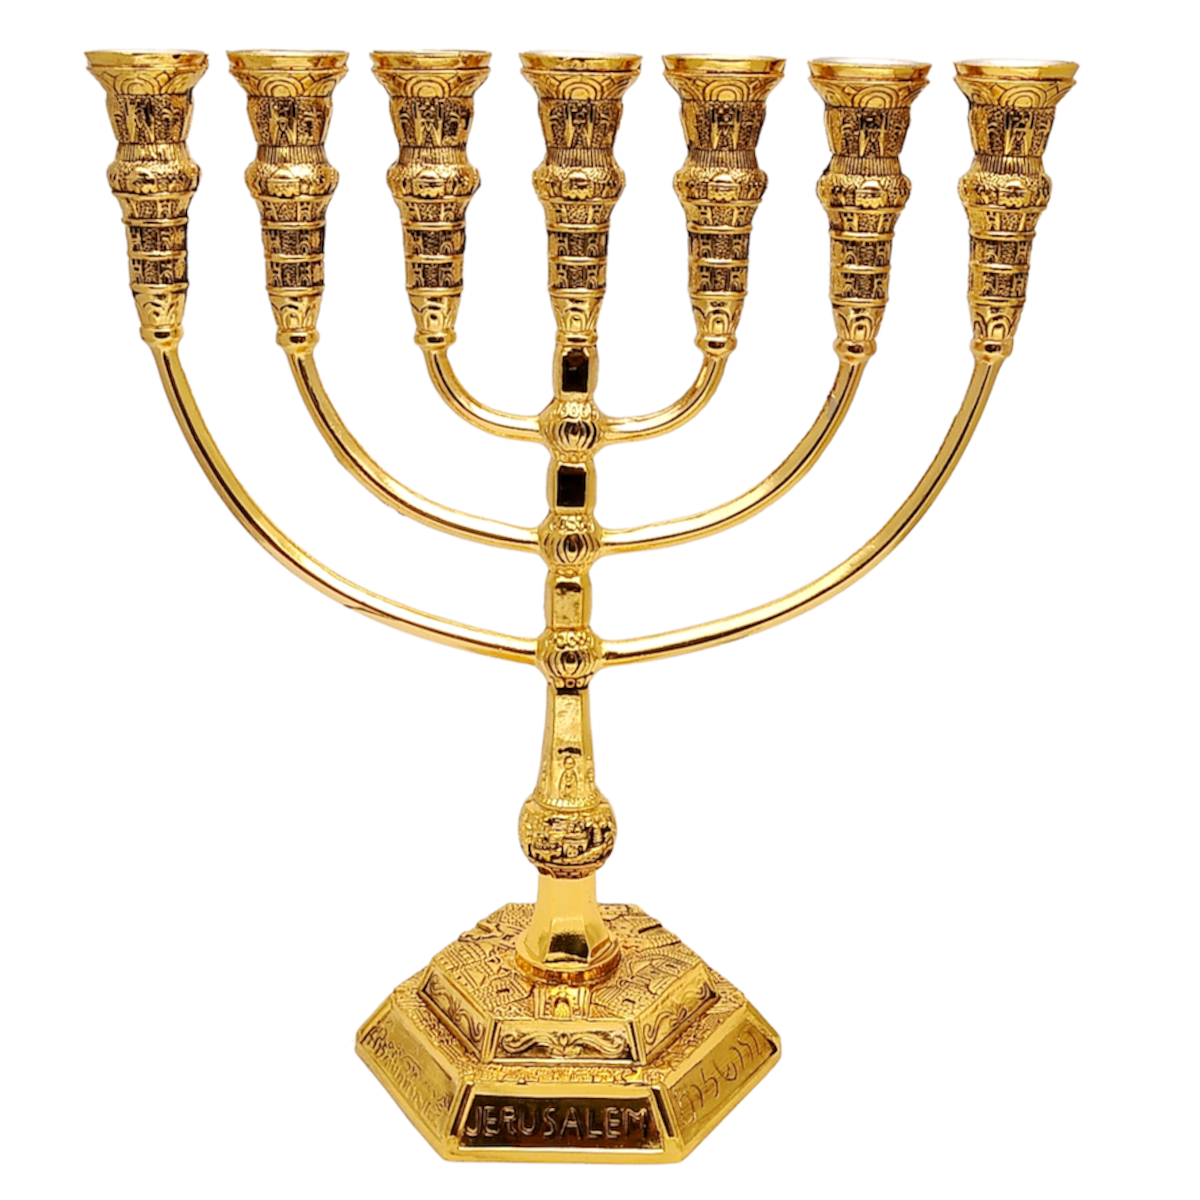 Authentic Temple Menorah Gold Plated Candle Holder Judaica from Jerusalem 13.4″ / 34cm